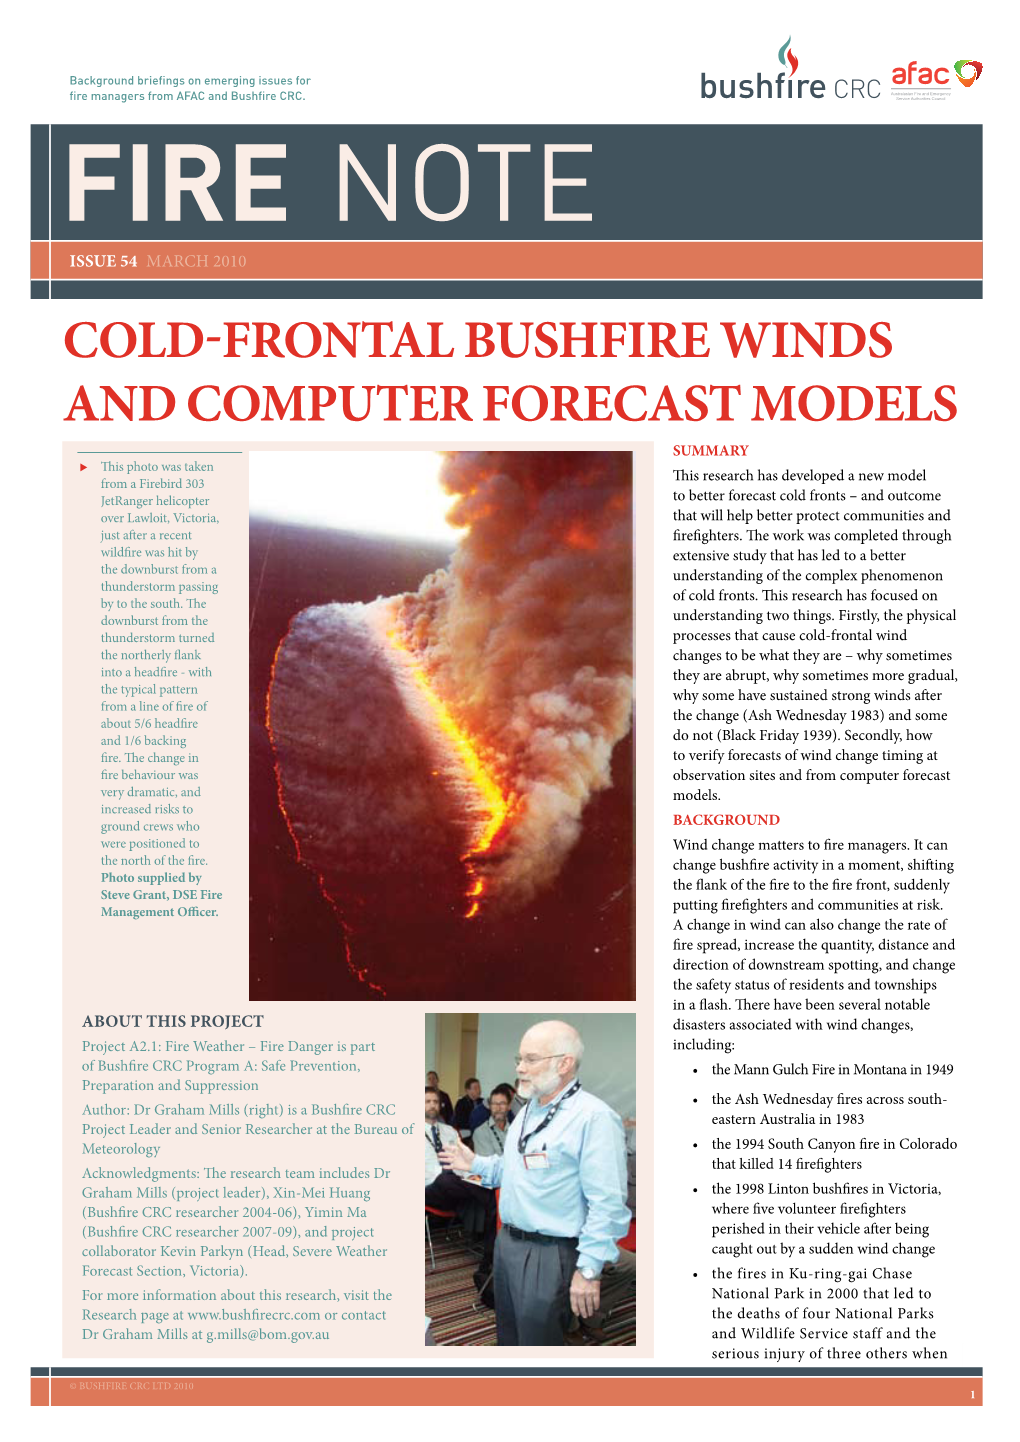 Cold-Frontal Bushfire Winds and Computer Forecast Models